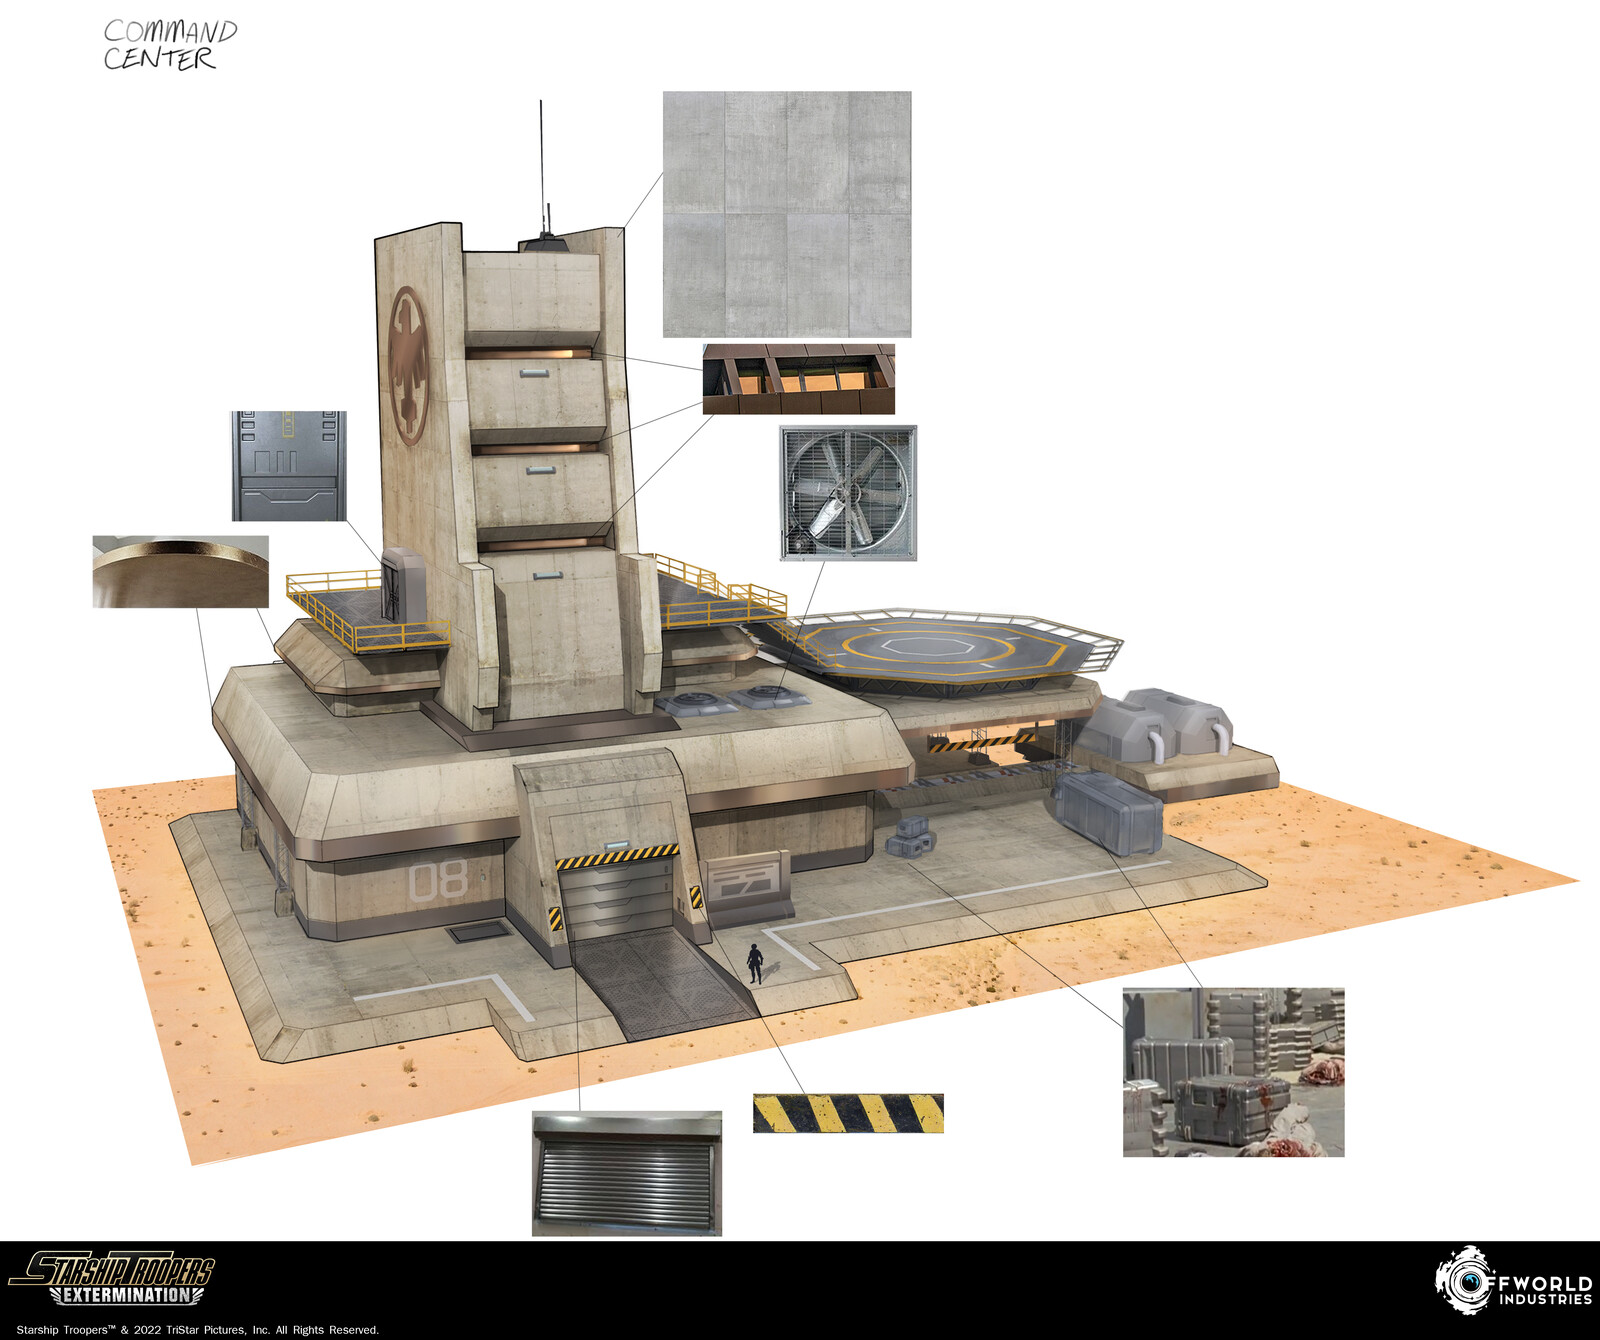 Base model created by Fin Downes 